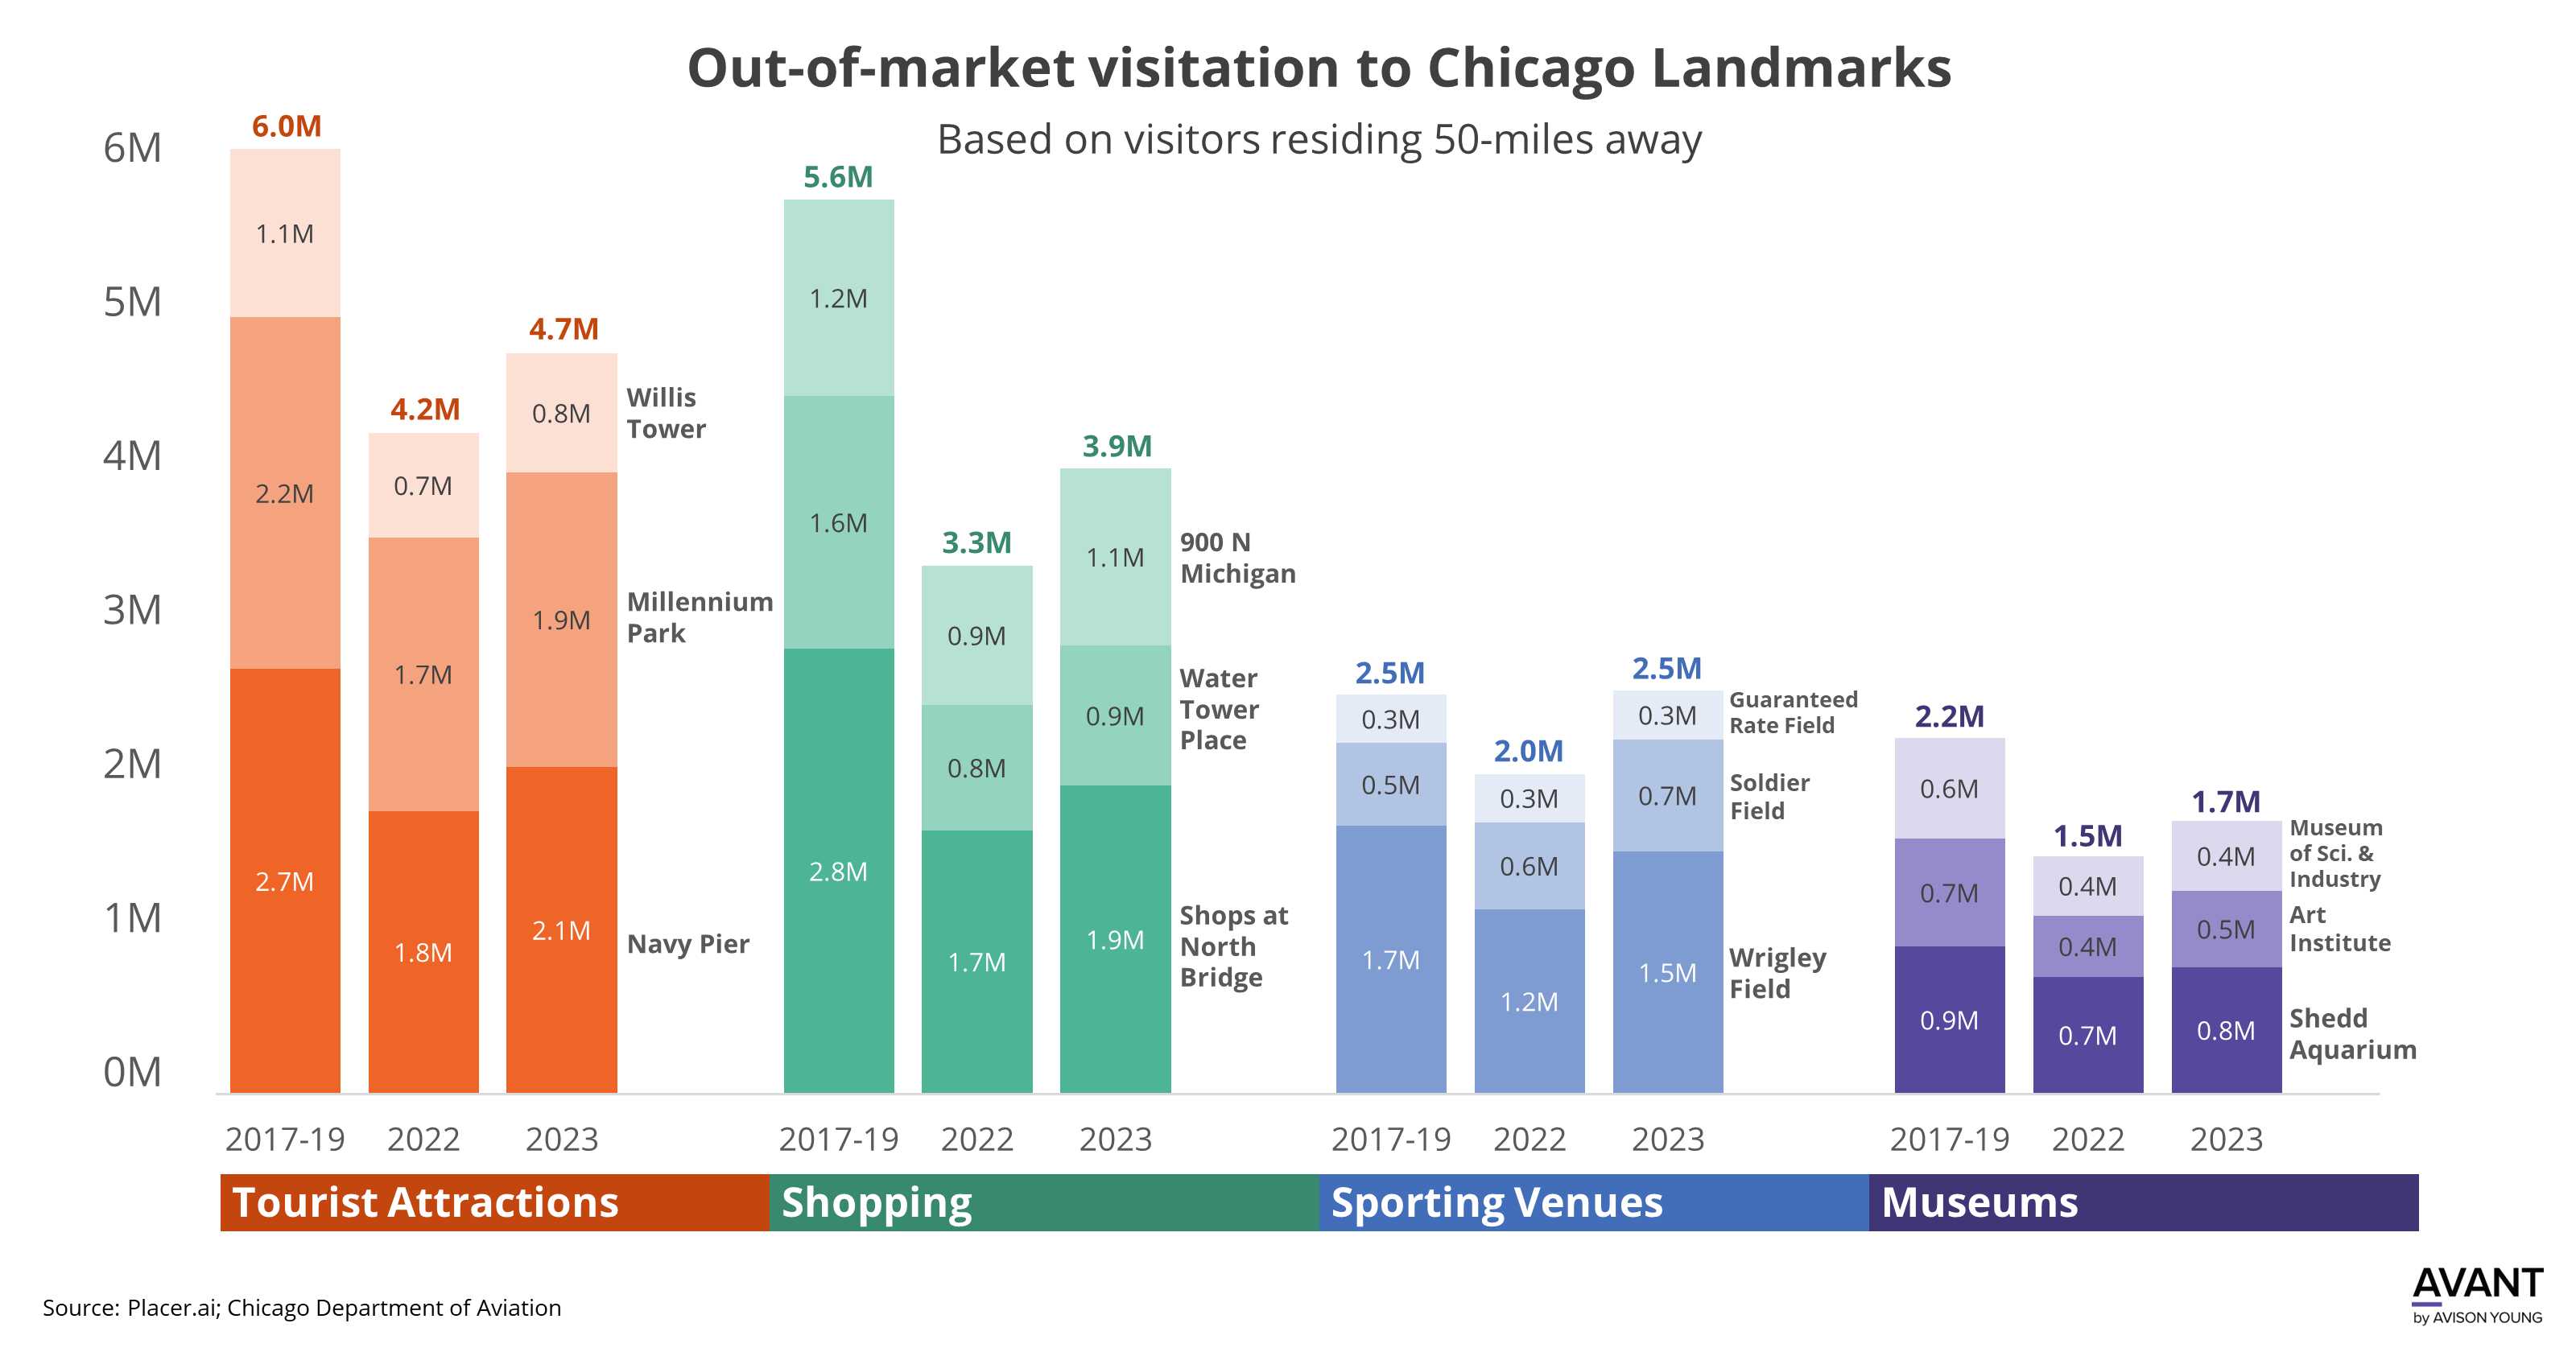 Chart shows out of market visitation to Chicago Landmarks from 2017 to 2023